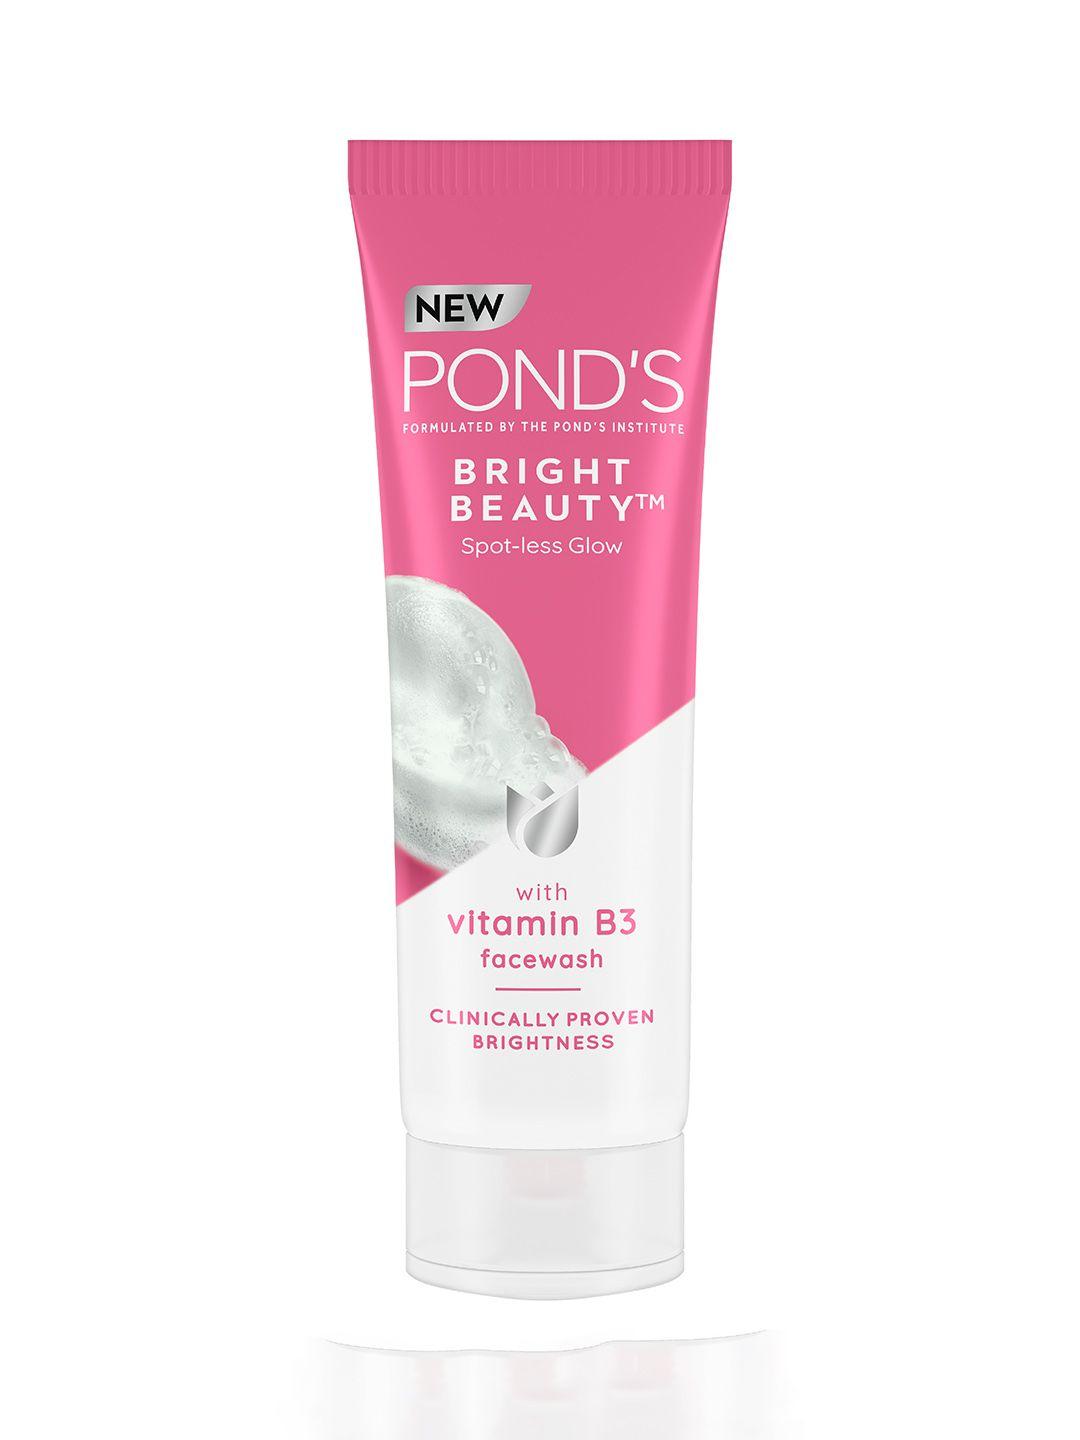 ponds-bright-beauty-spot-less-glow-face-wash-with-vitamin-b3---50g